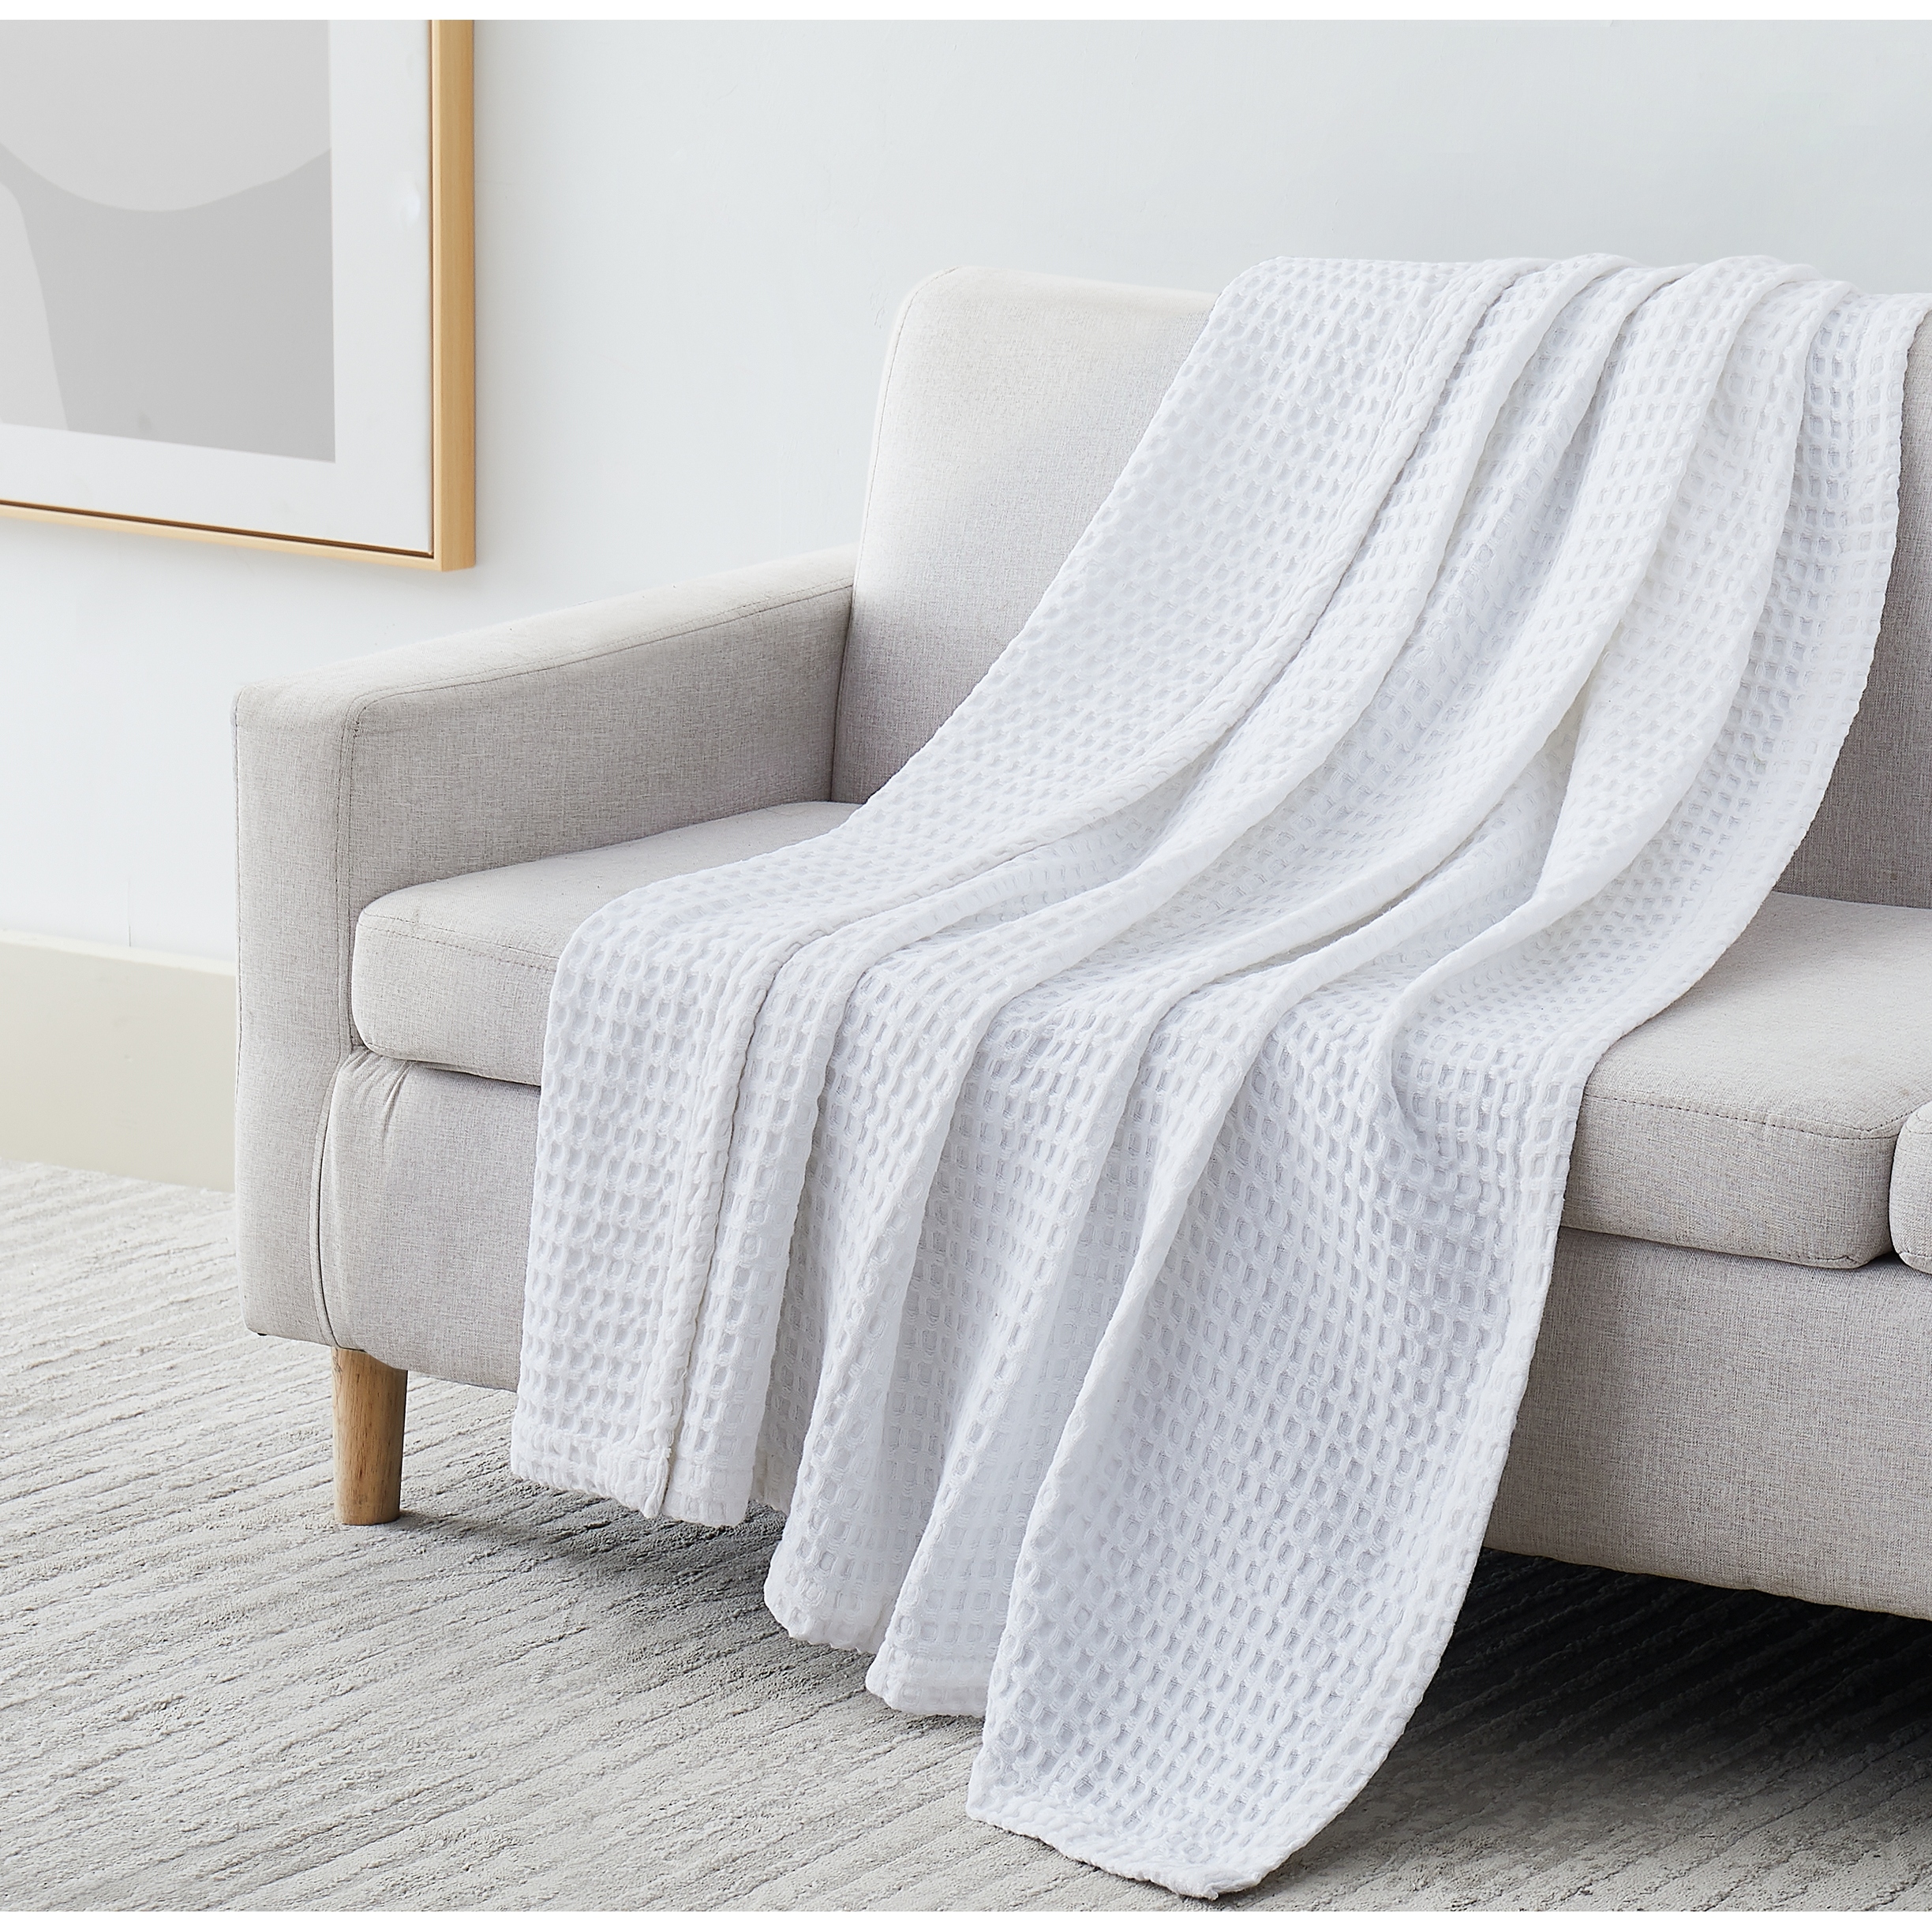 100% Cotton Waffle Weave Blanket - On Sale - Bed Bath & Beyond